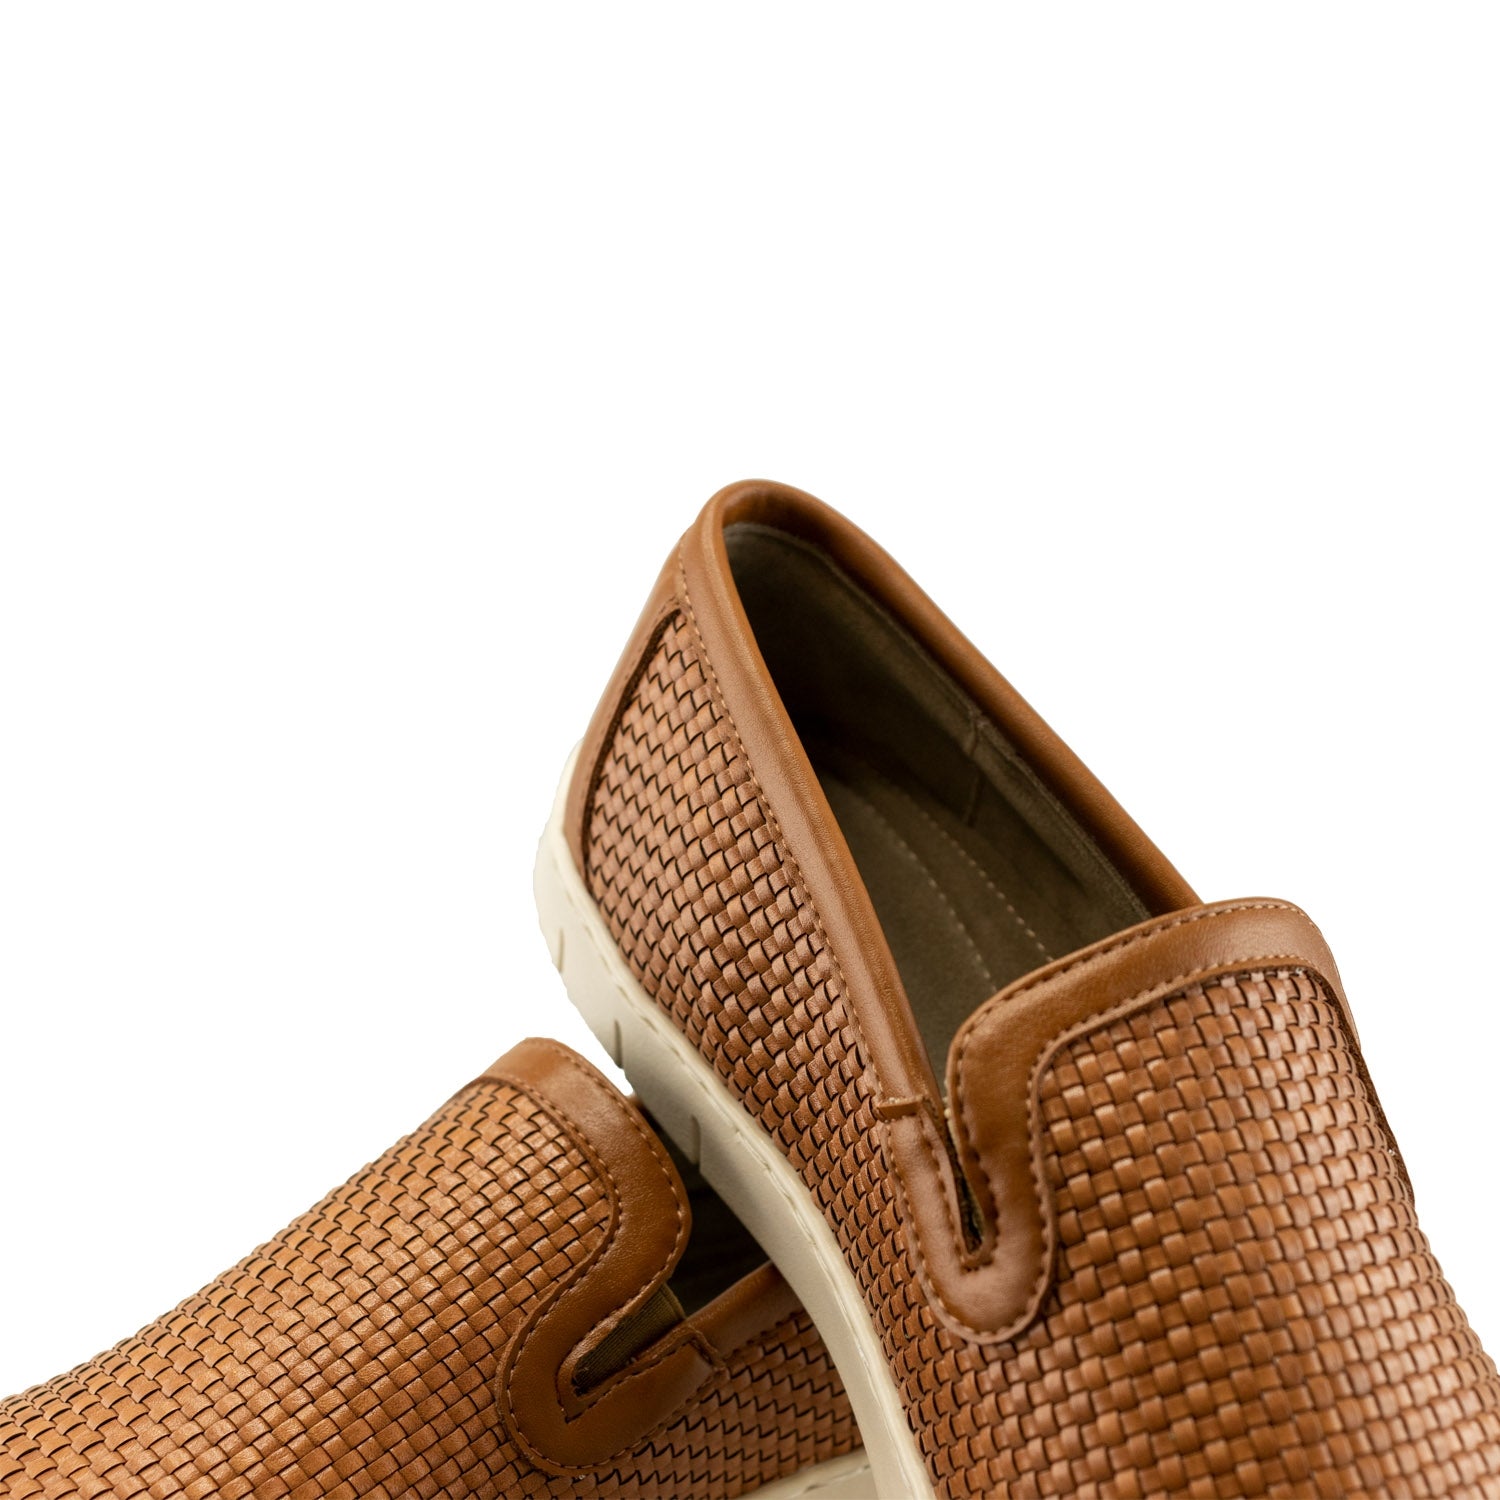 Scottsdale Slip on in Tan Woven Vegan Leather by T.B. Phelps